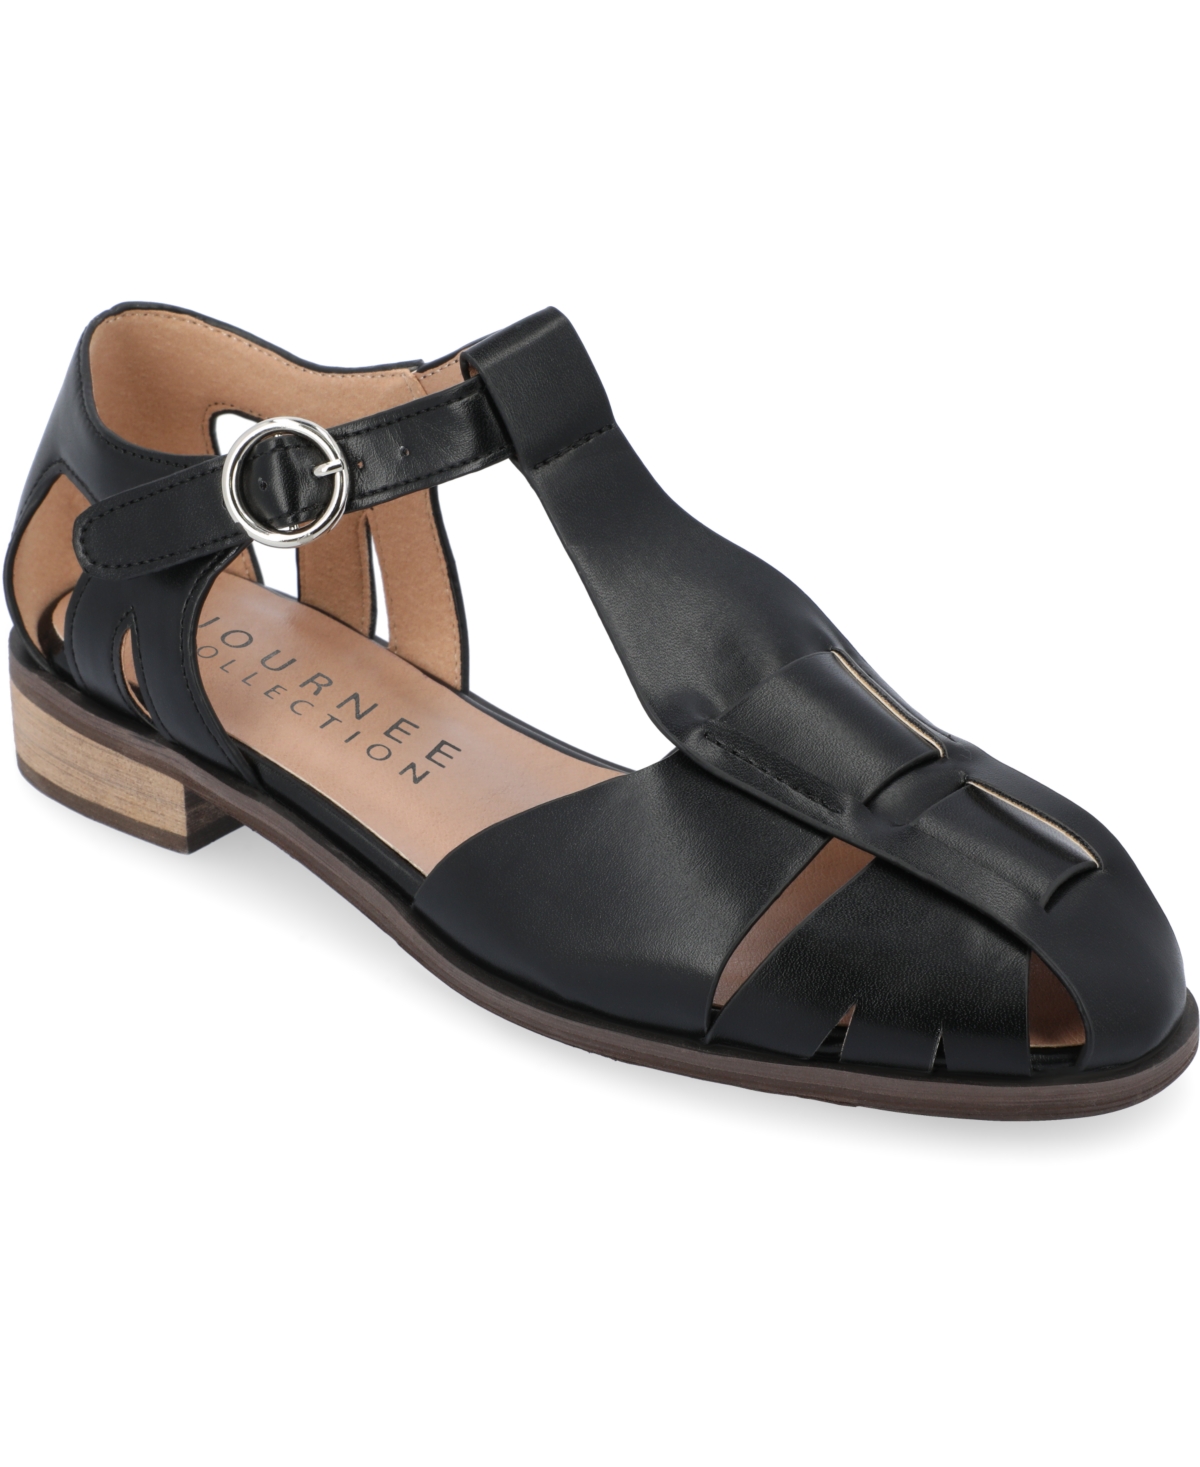 JOURNEE COLLECTION WOMEN'S AZZARIA FLATS